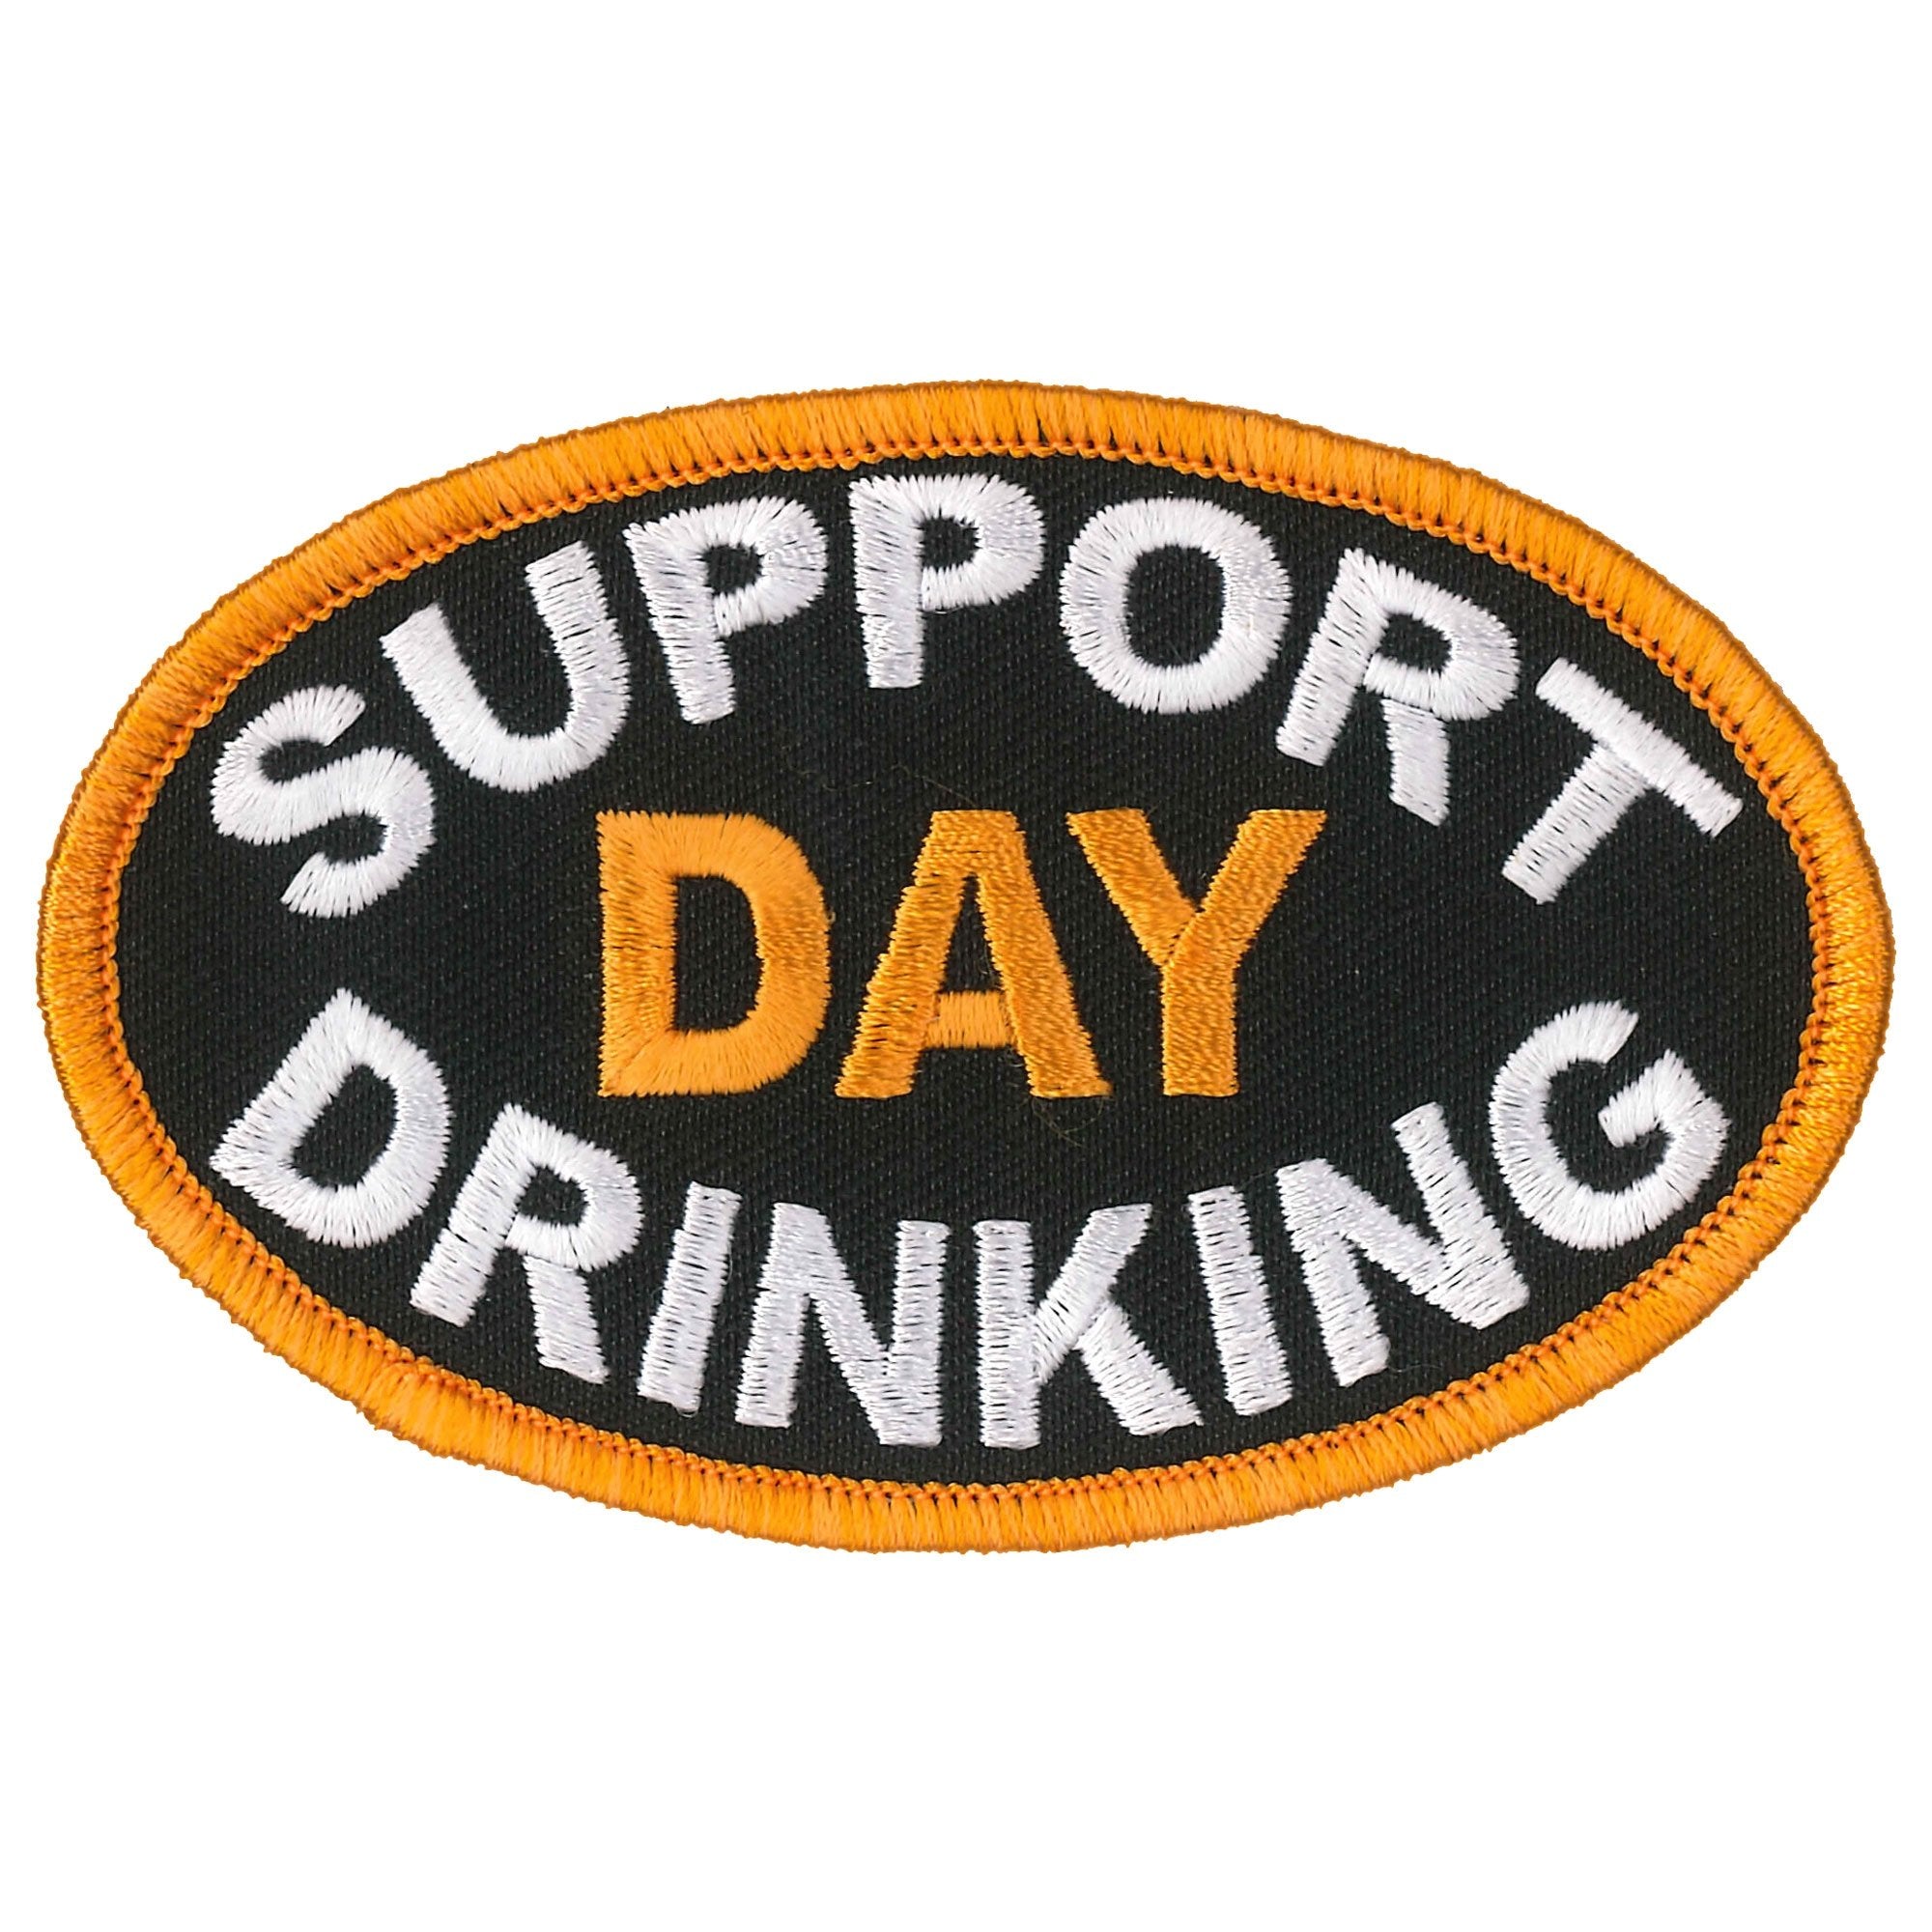 Hot Leathers PPL9841 Support Day Drinking 4"x 2" Patch